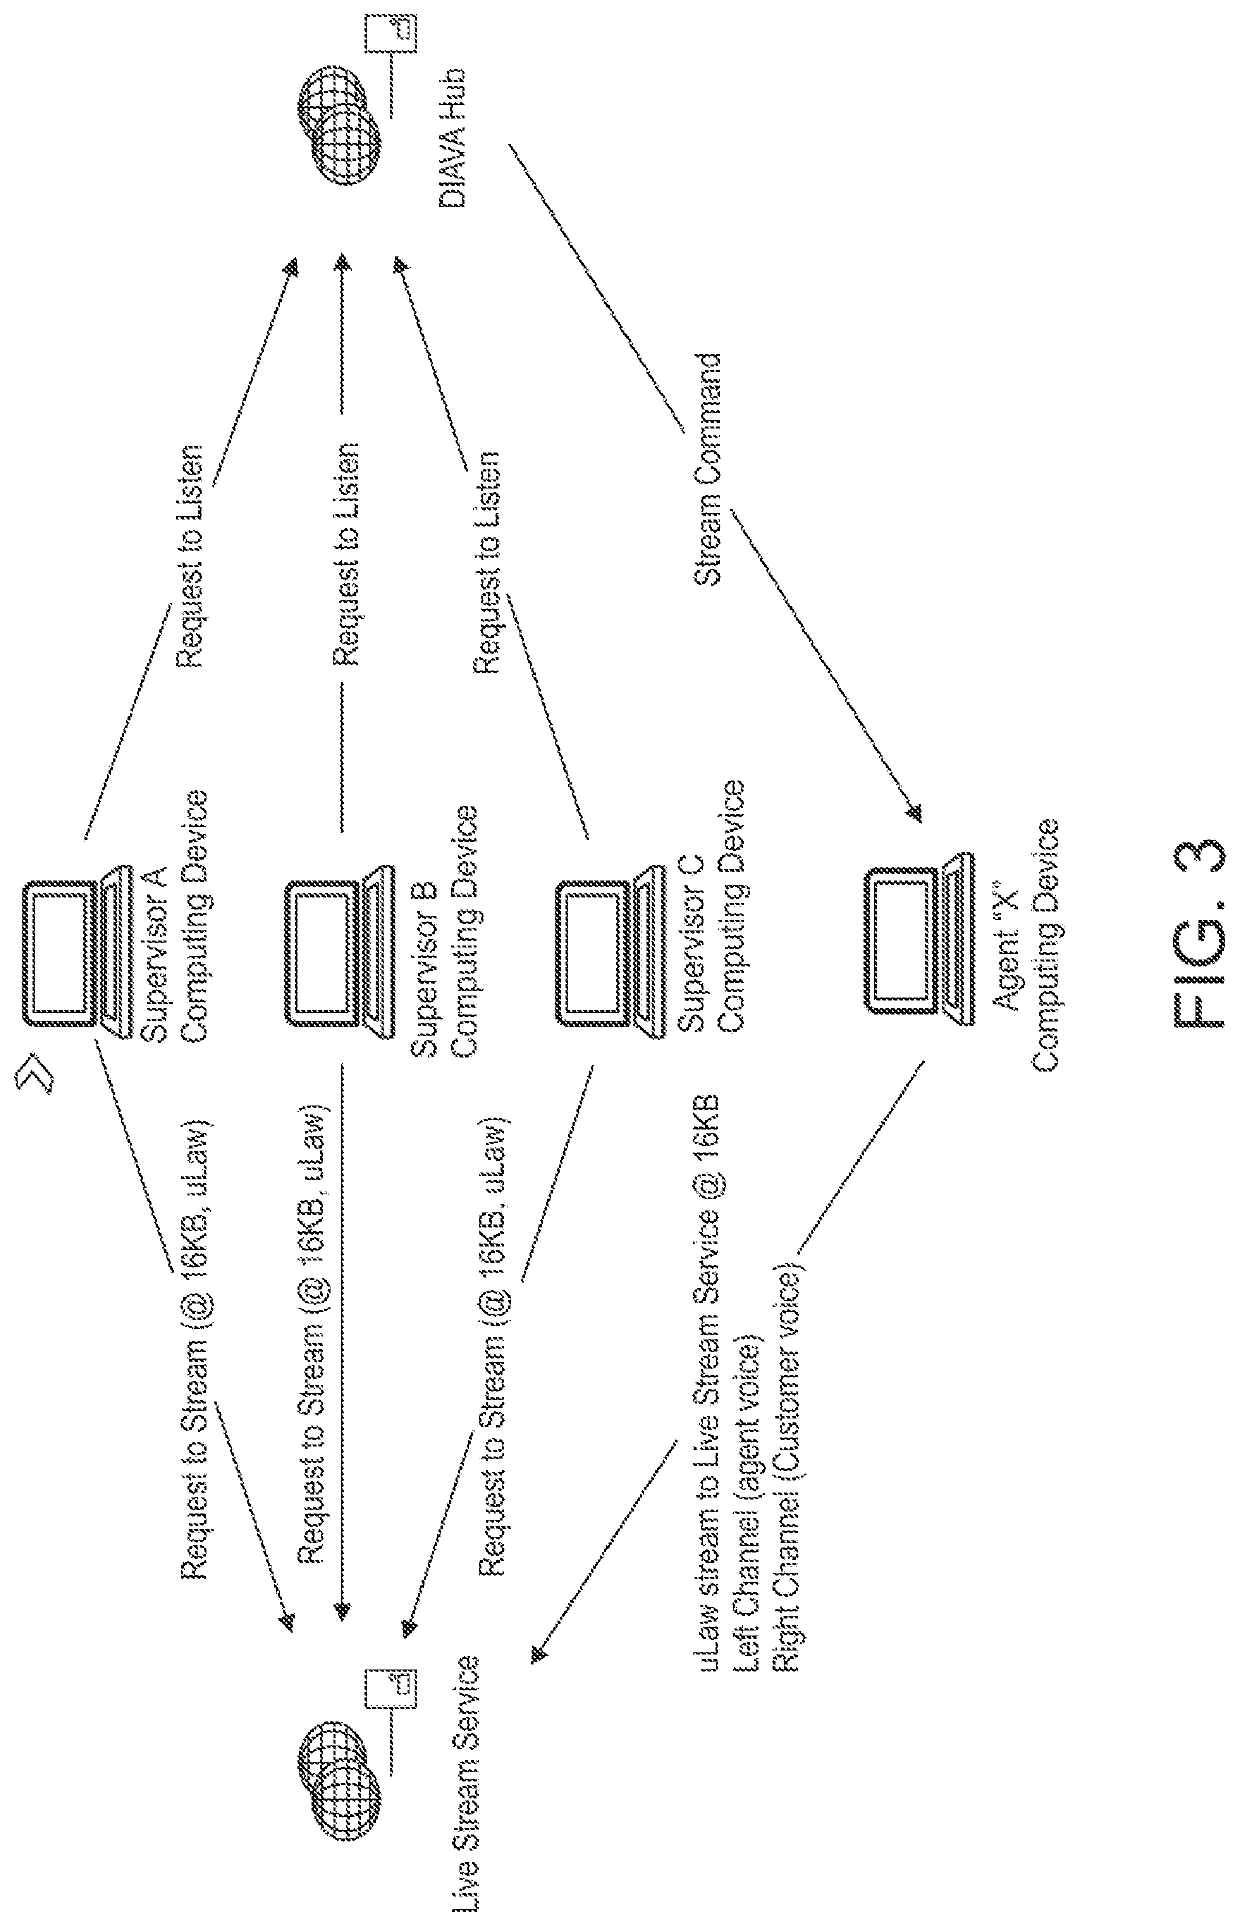 Systems and methods for intelligent monitoring